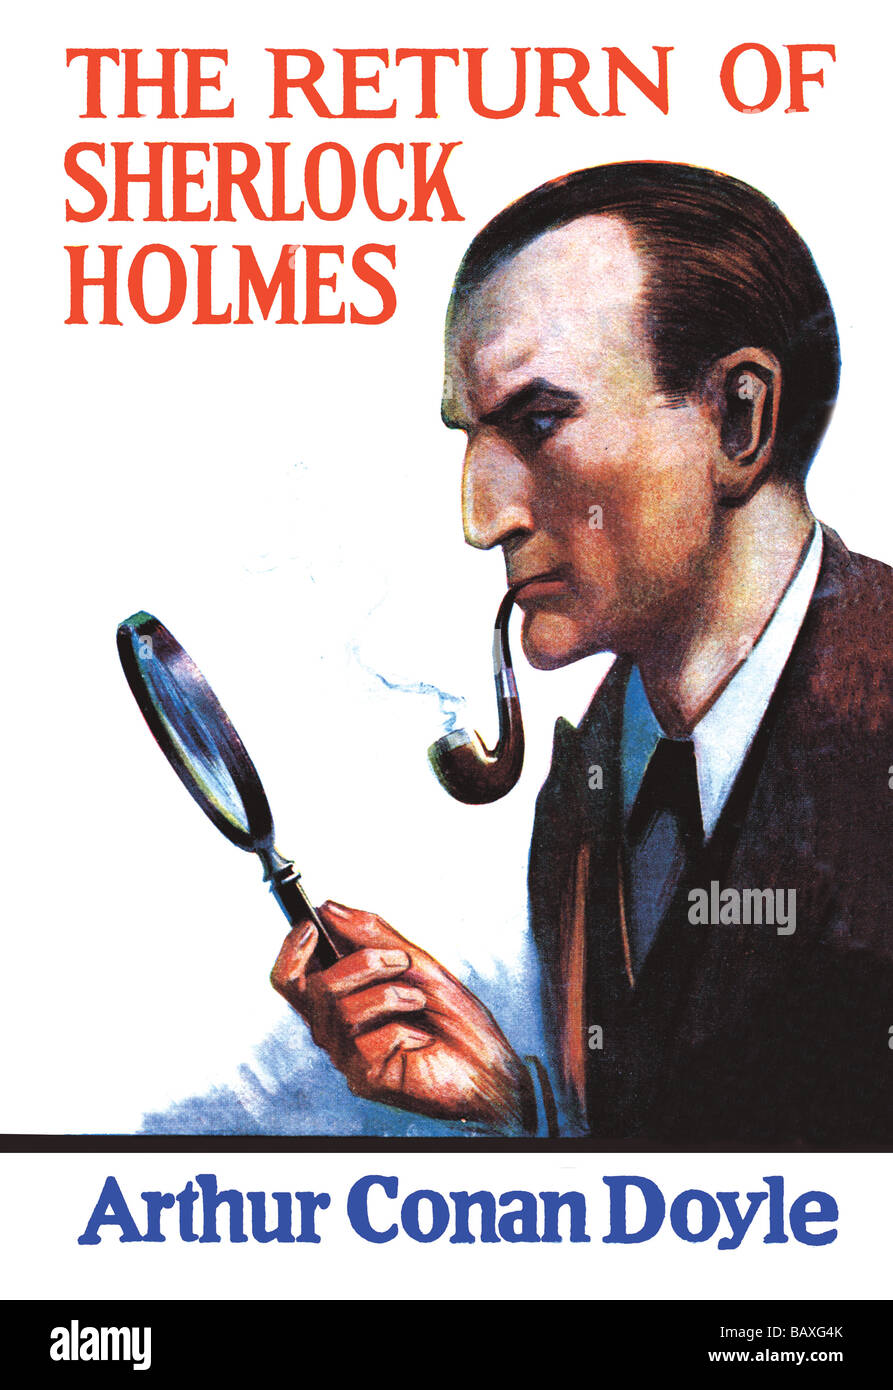 The Return of Sherlock Holmes #2 (book cover) Stock Photo